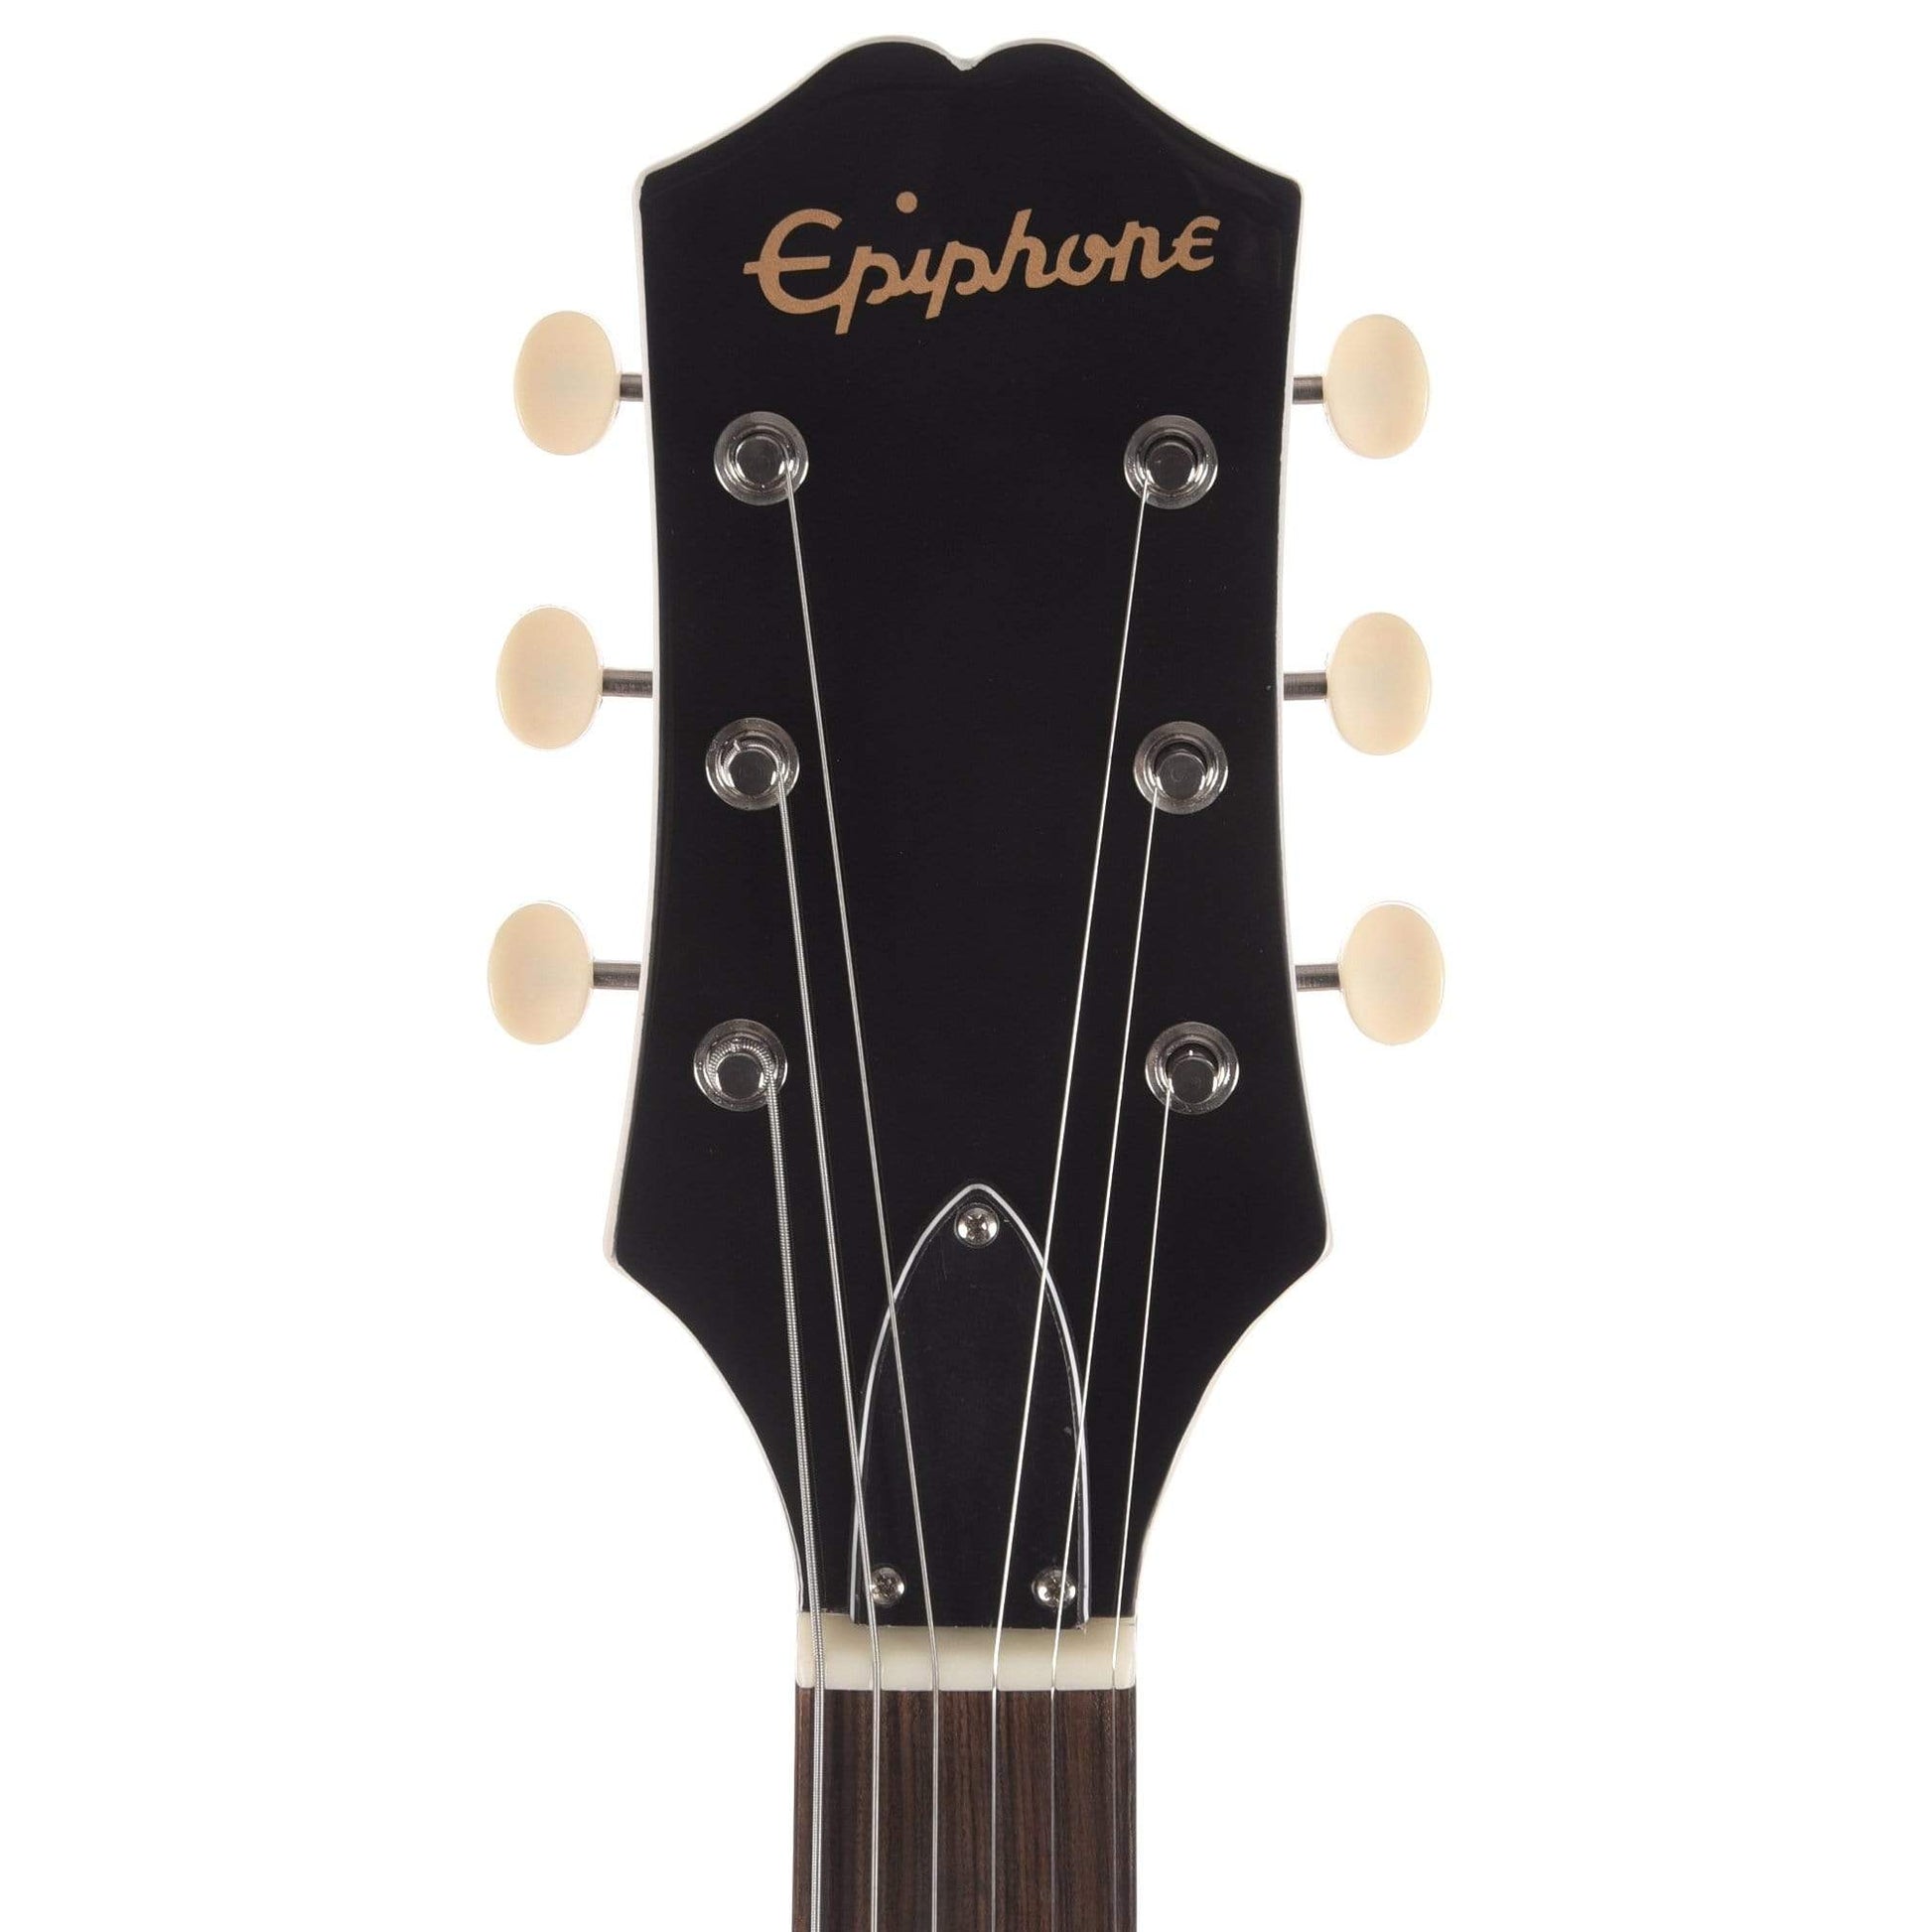 Epiphone George Thorogood "White Fang" ES-125 TDC Signature Outfit Electric Guitars / Semi-Hollow